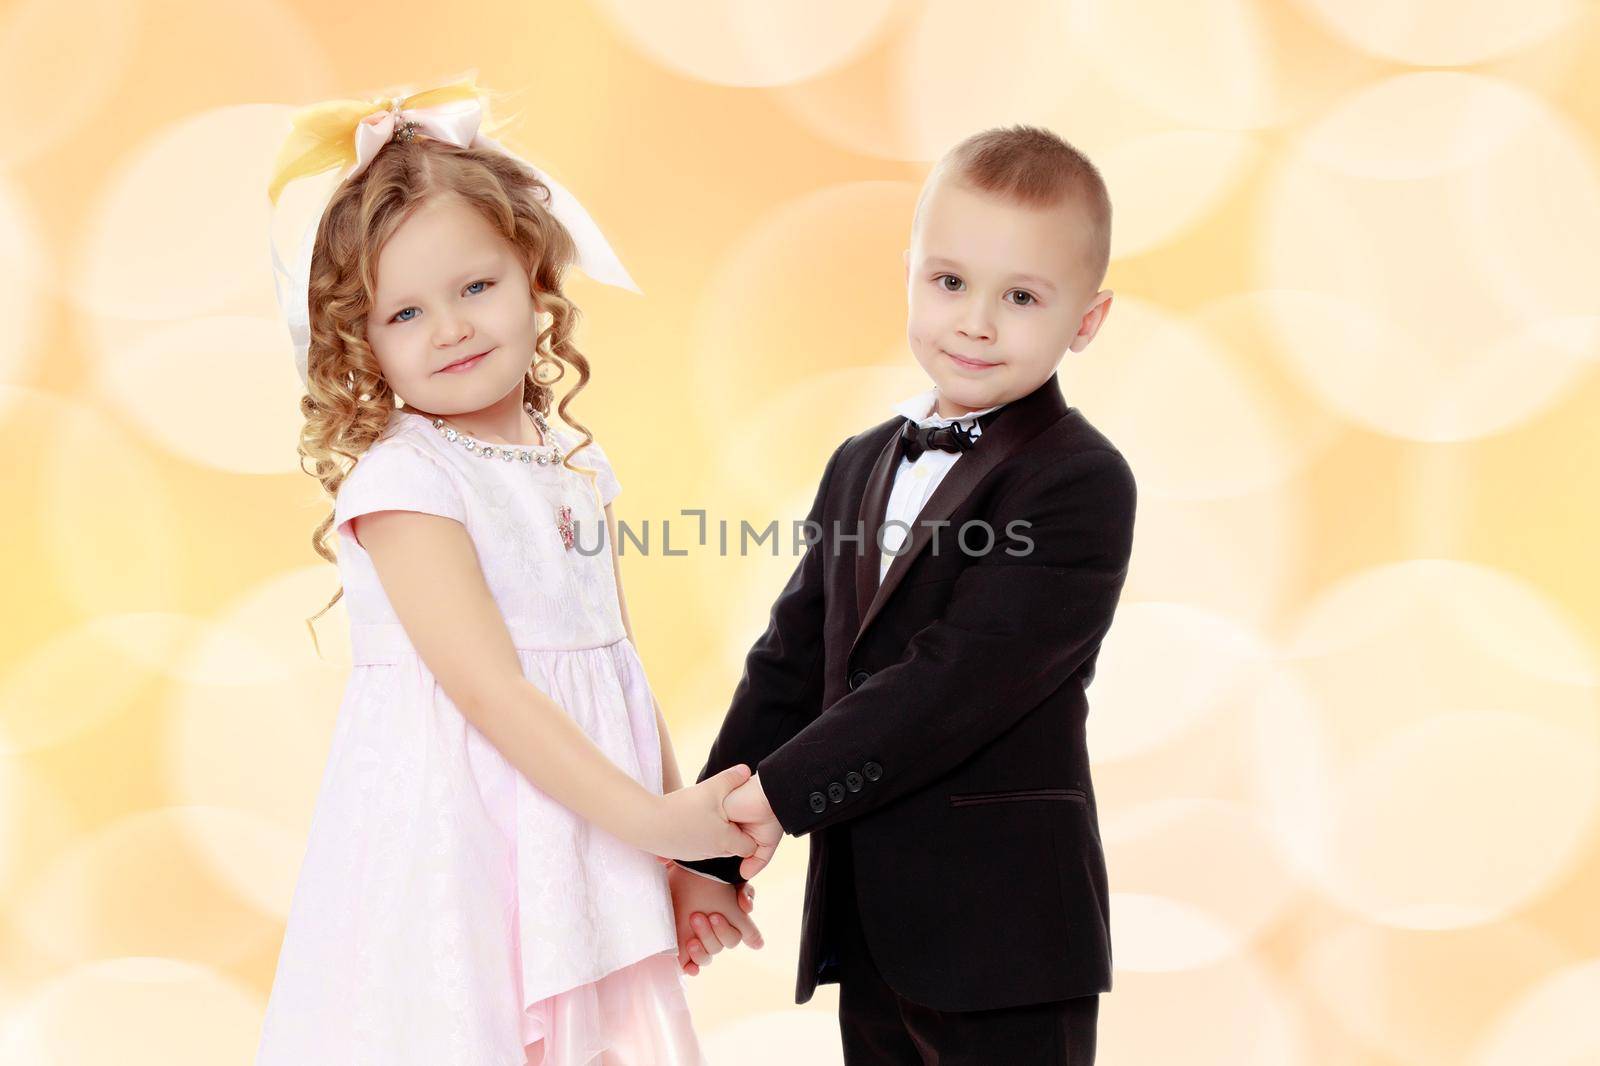 little cute boy and girl hugging playing on white background, happy family smiling